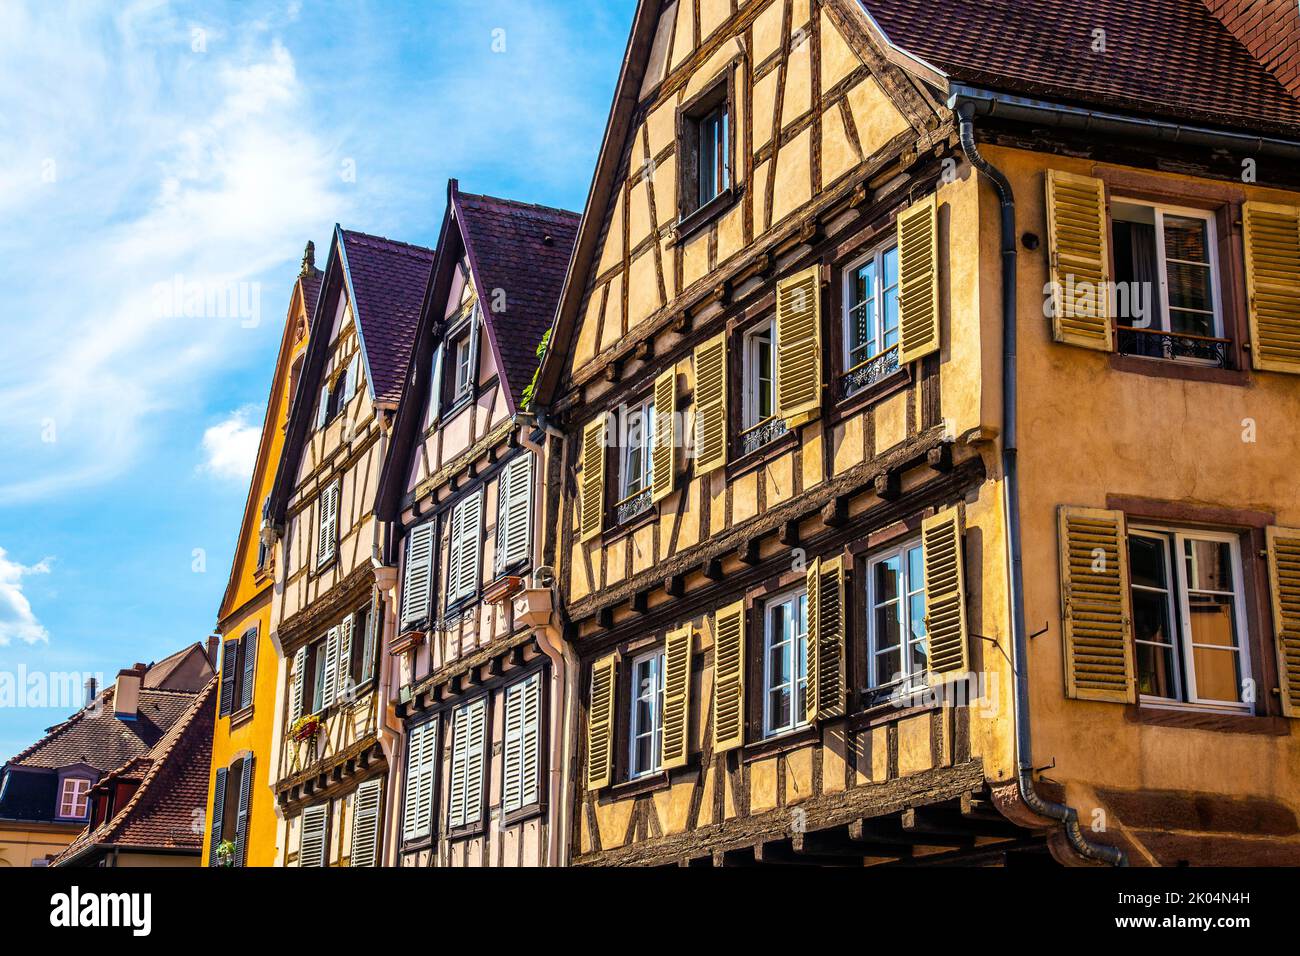 Colourful timber-framed medieval houses on Grand Rue, Colmar, France Stock Photo